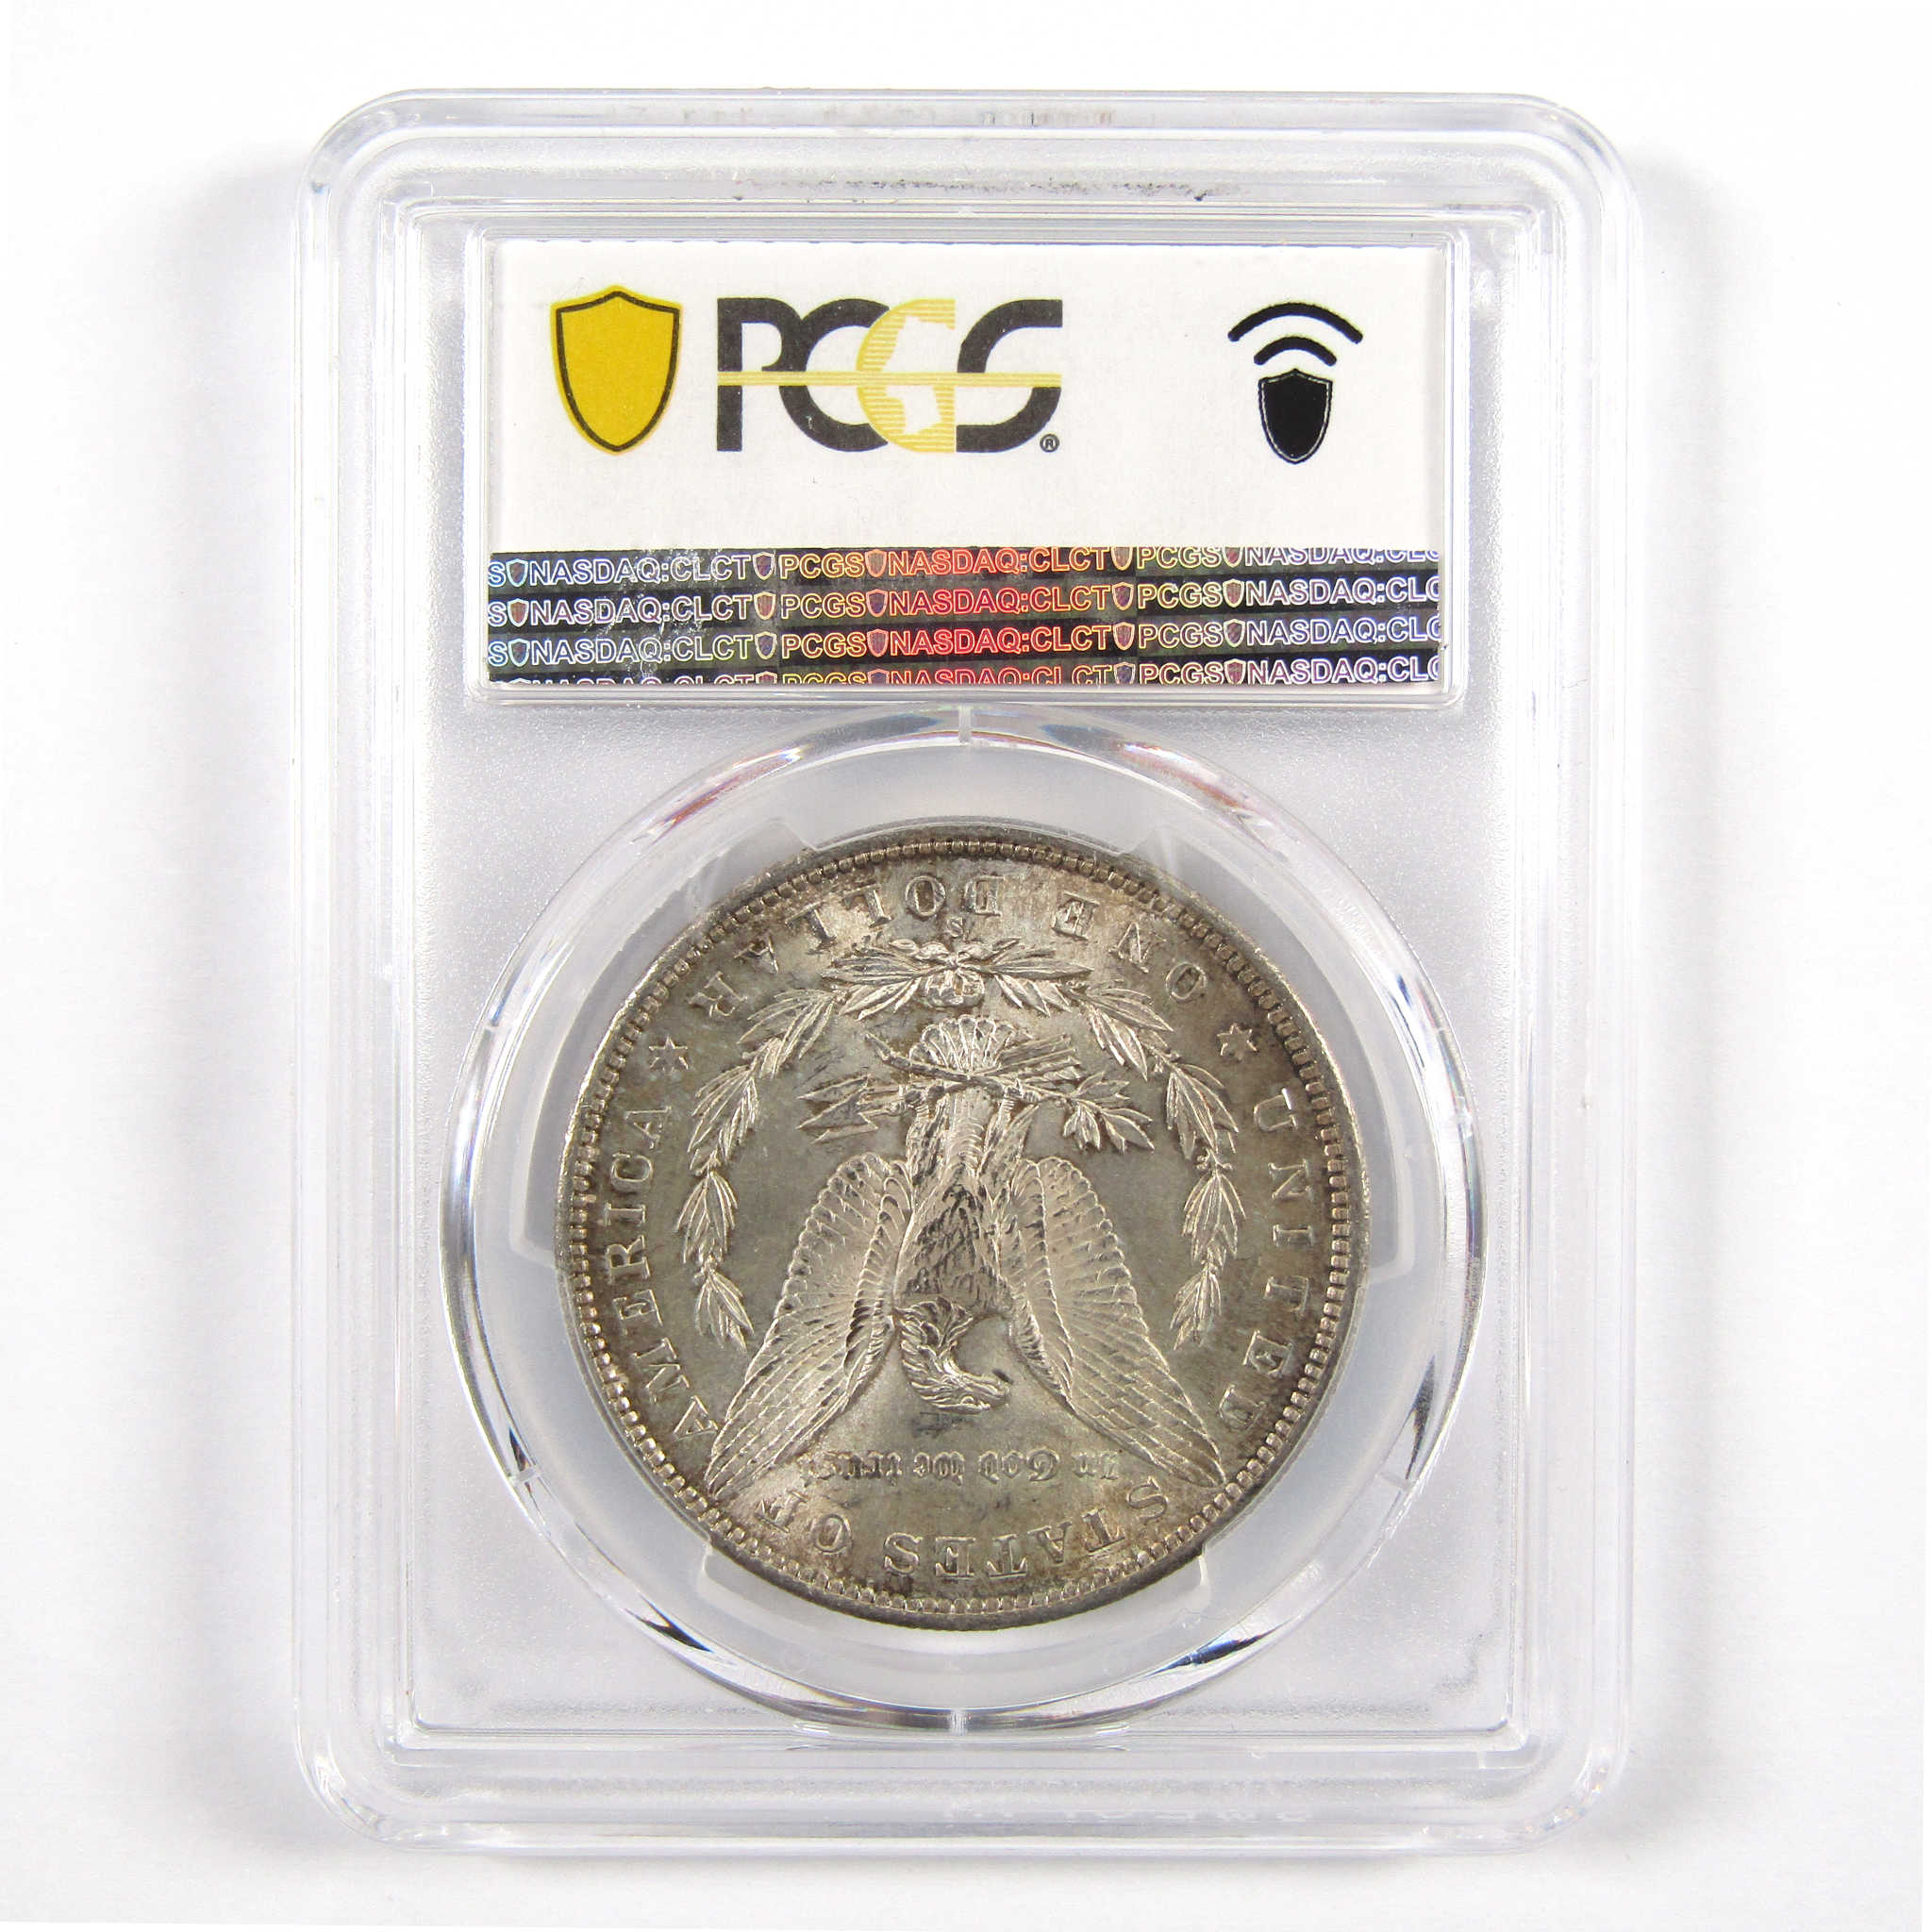 1890 S Morgan Dollar MS 61 PCGS 90% Silver $1 Uncirculated SKU:I11200 - Morgan coin - Morgan silver dollar - Morgan silver dollar for sale - Profile Coins &amp; Collectibles